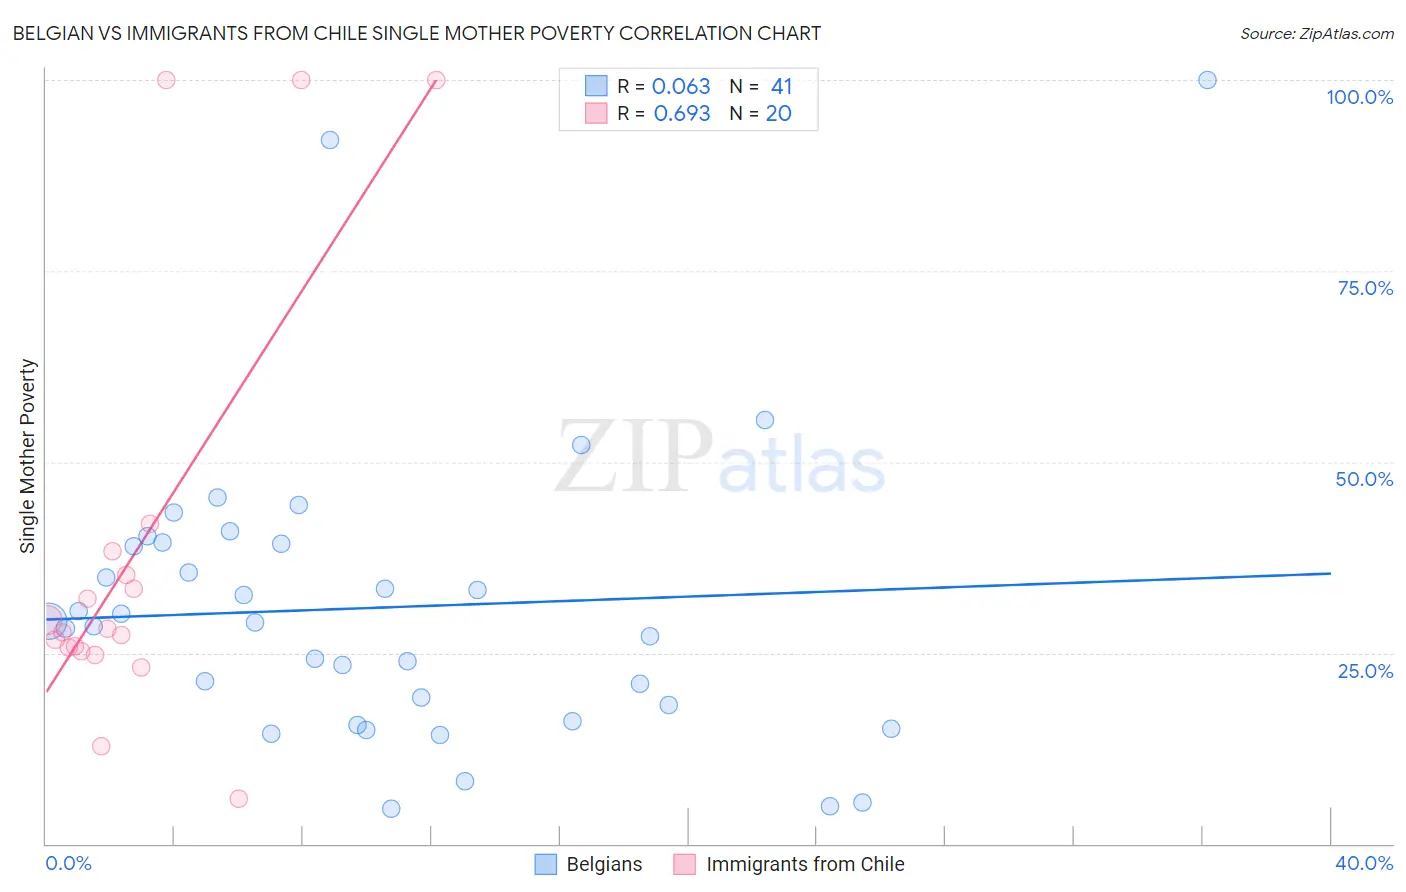 Belgian vs Immigrants from Chile Single Mother Poverty